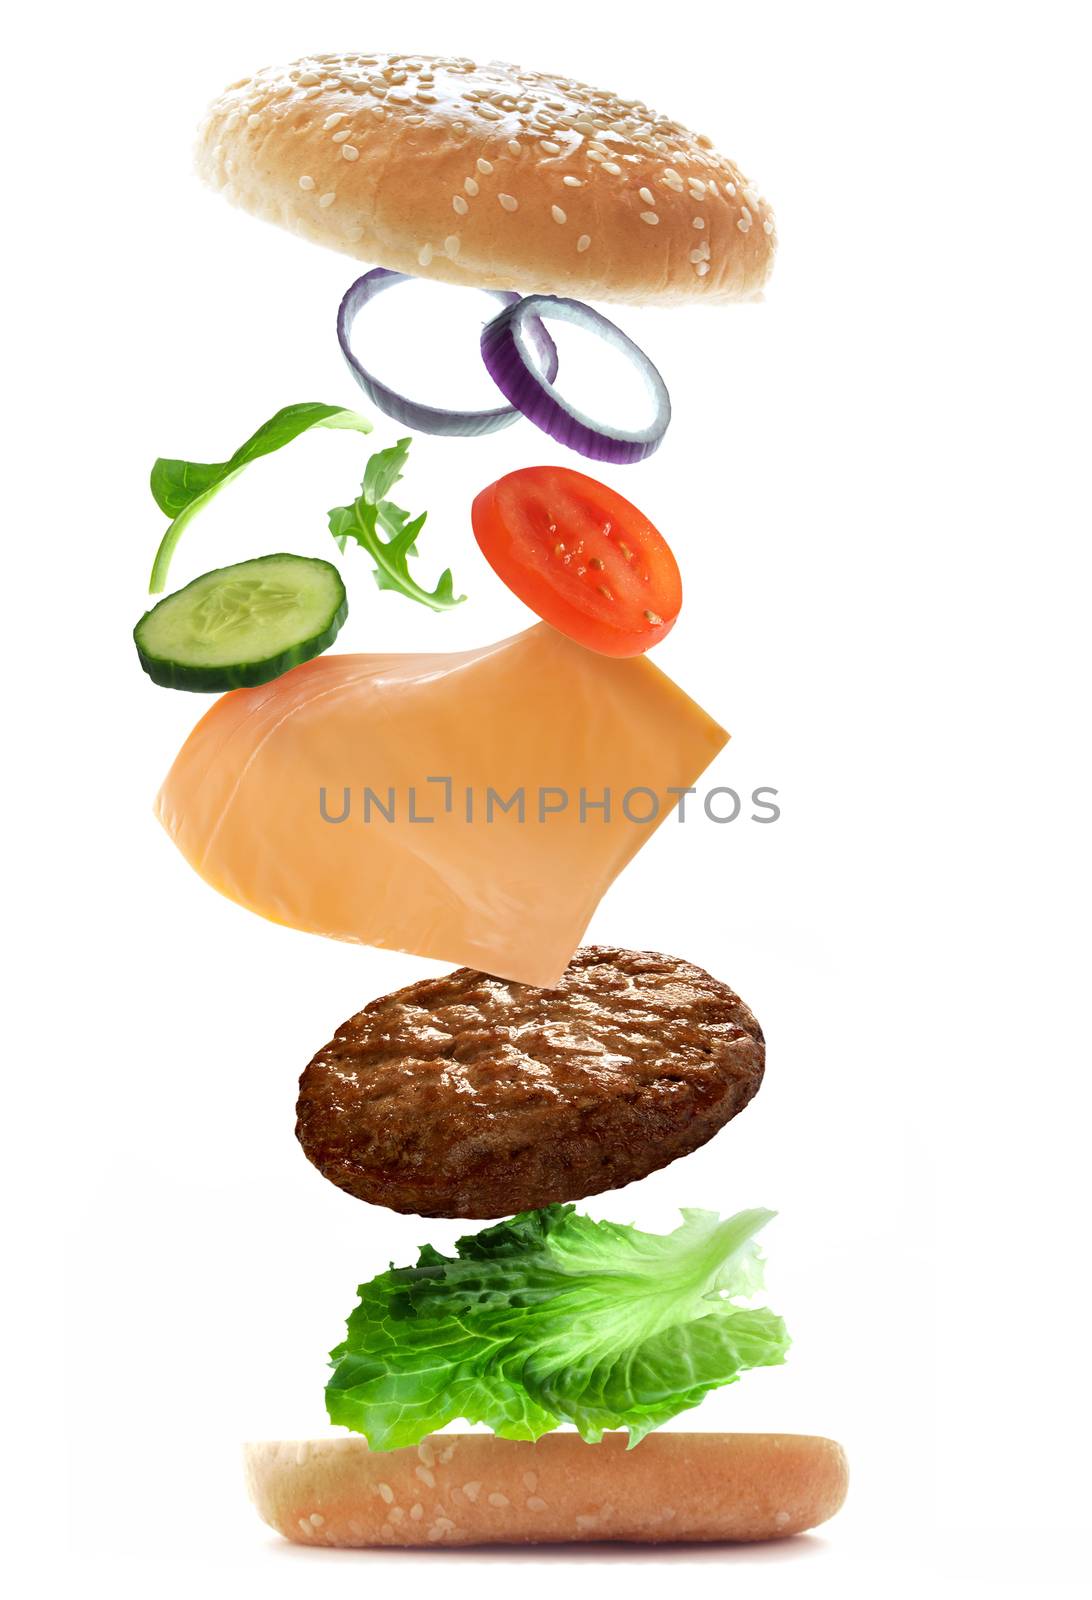 Burger ingredients falling into place to create a sandwich over a white background